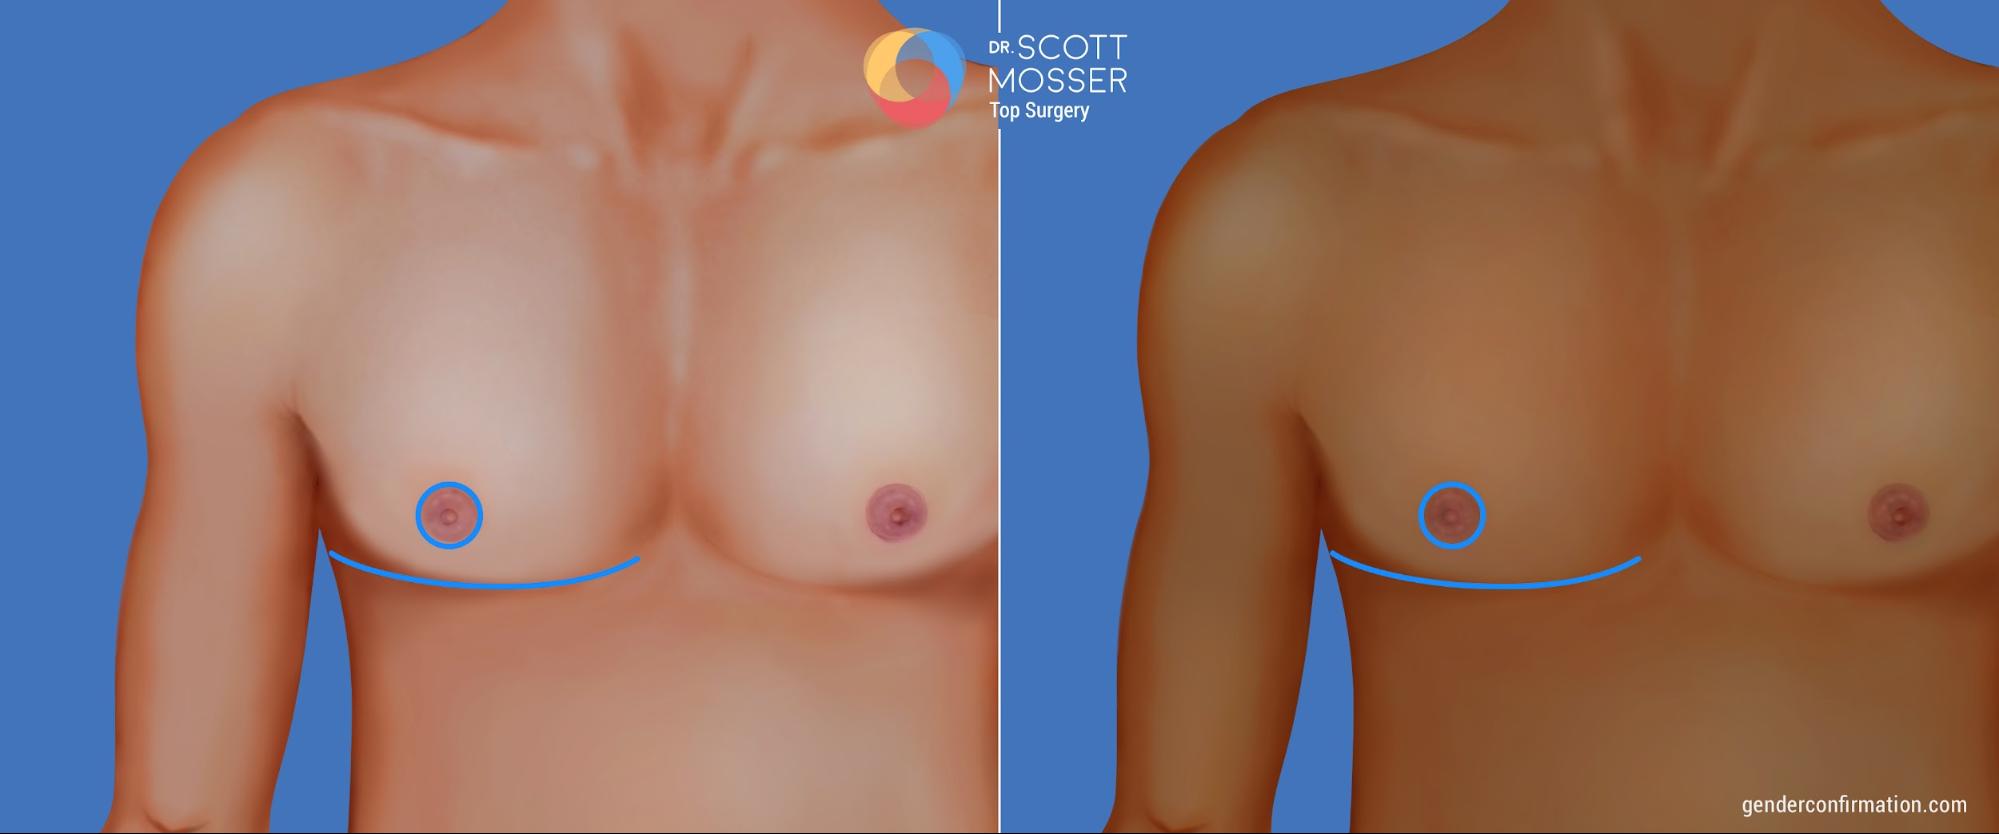 Nipple-sparing Double Incision Top Surgery